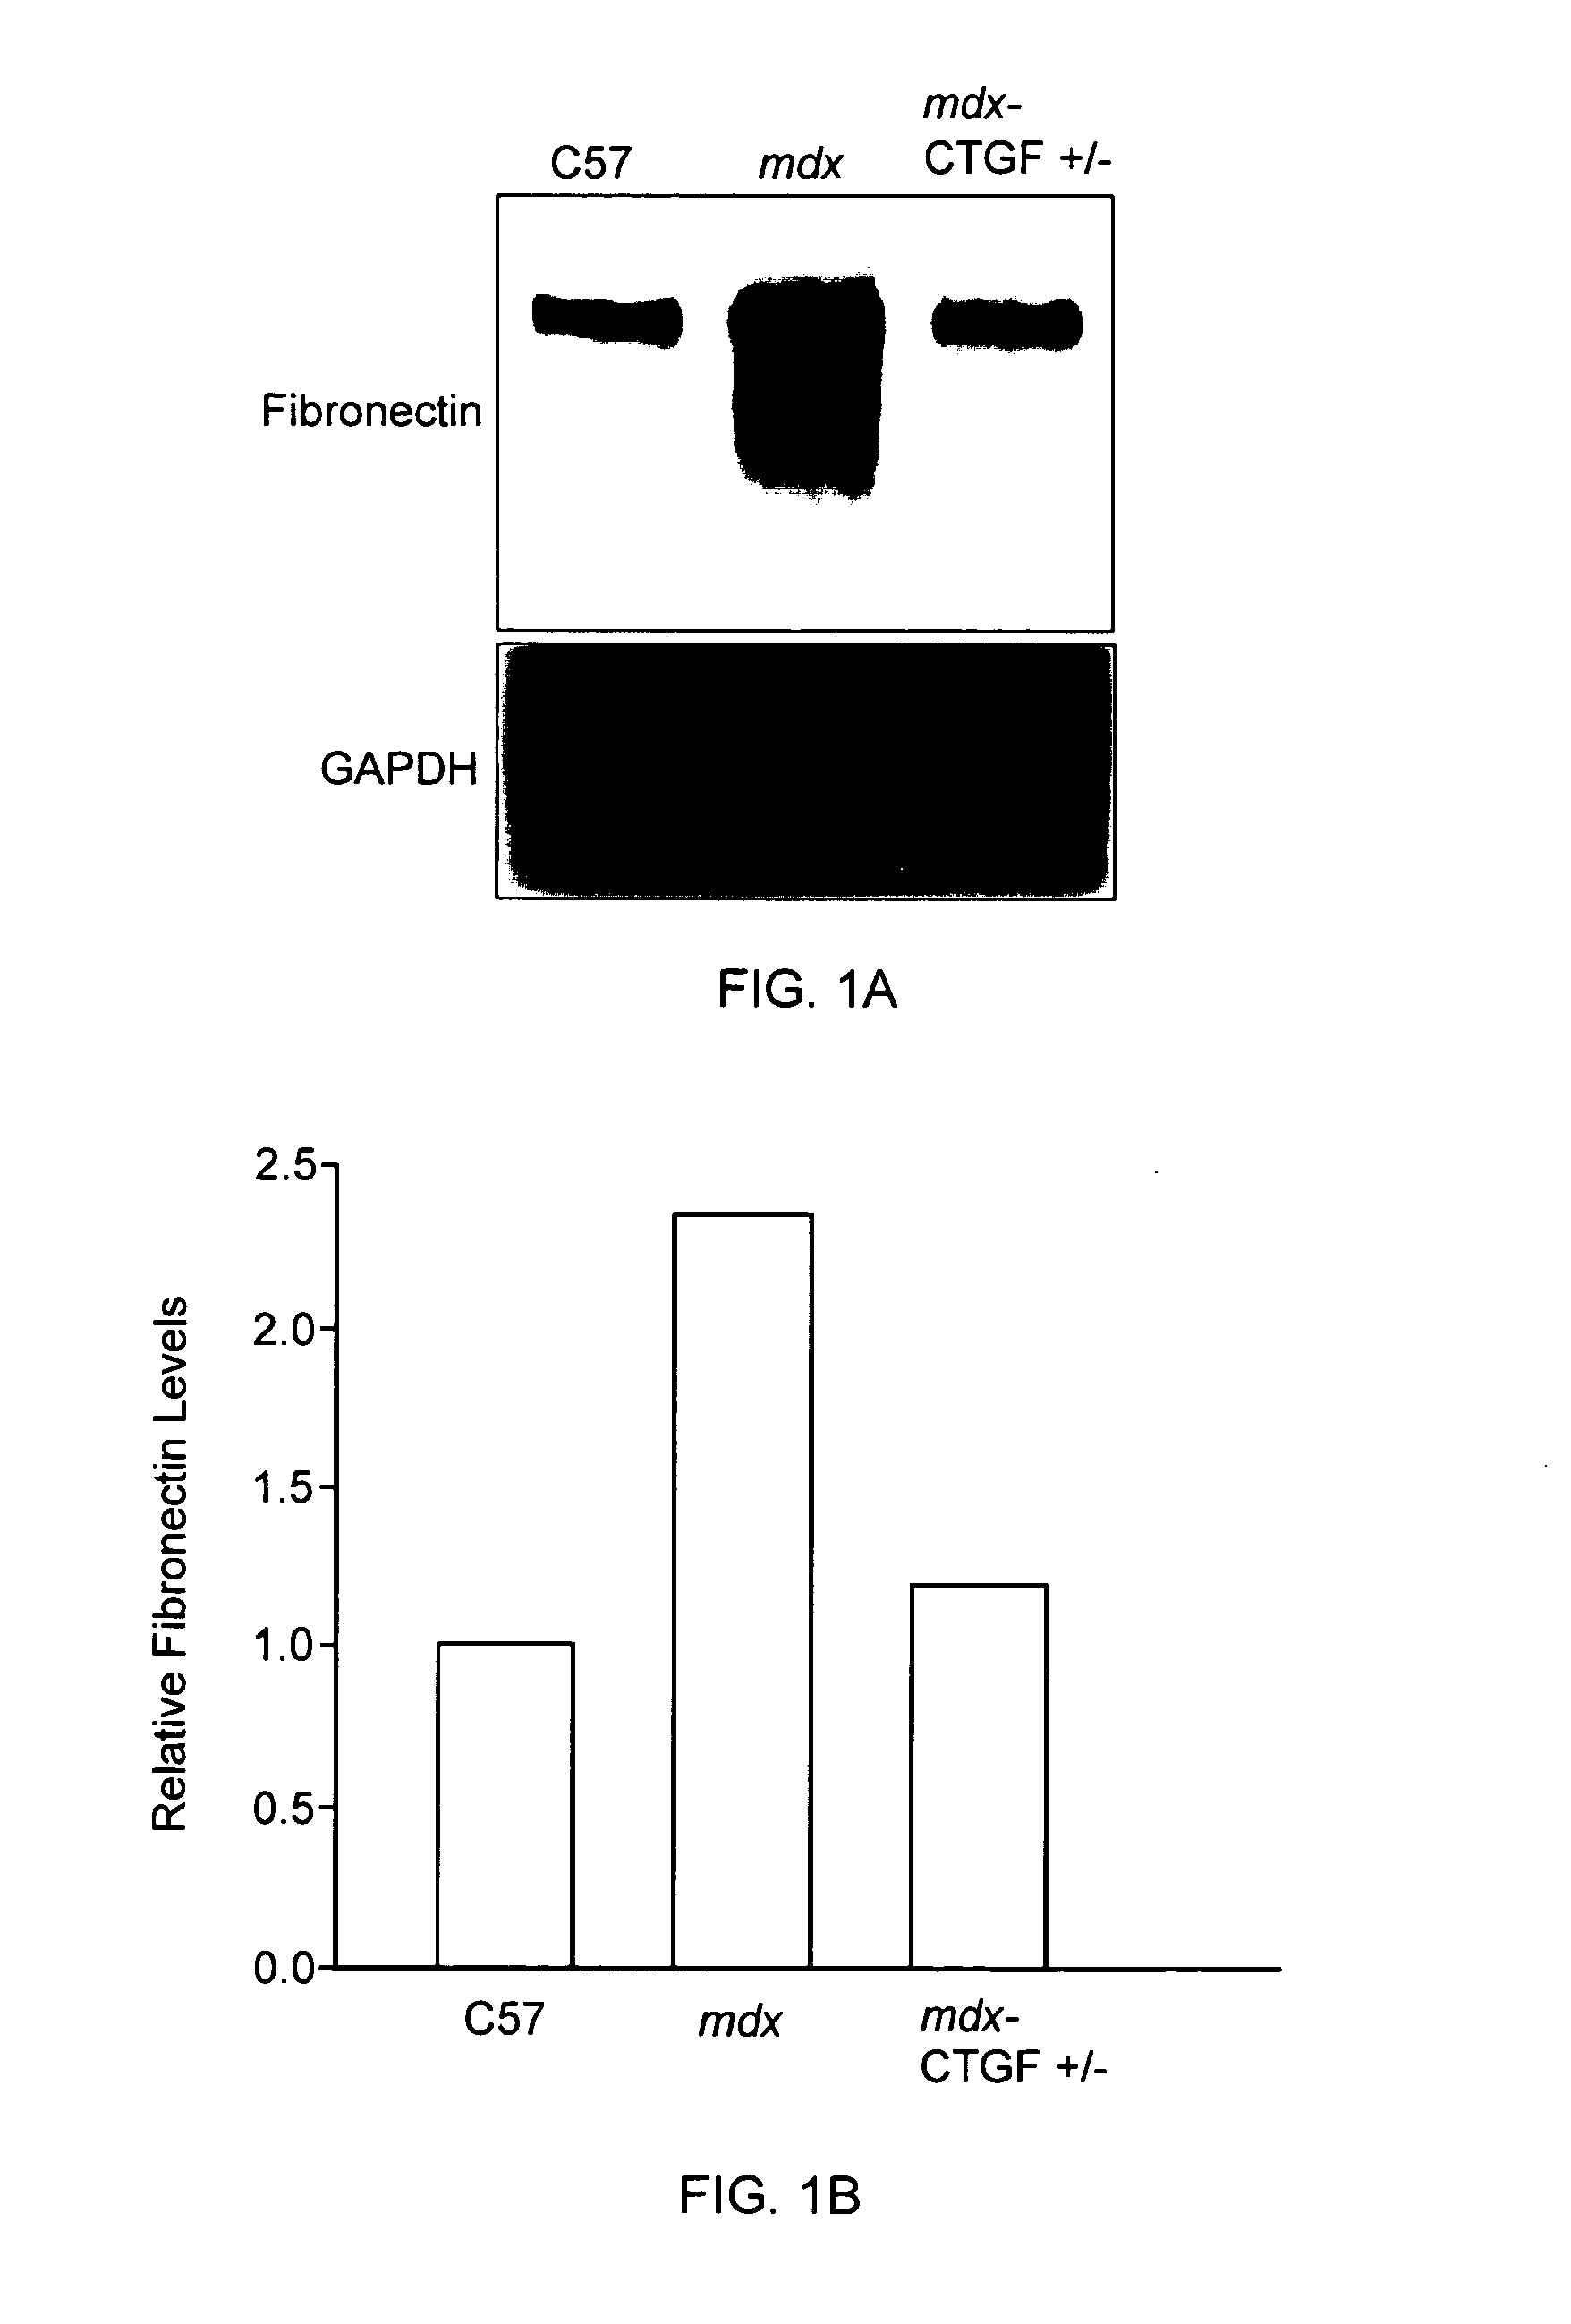 Methods for Treatment of Muscular Dystrophy